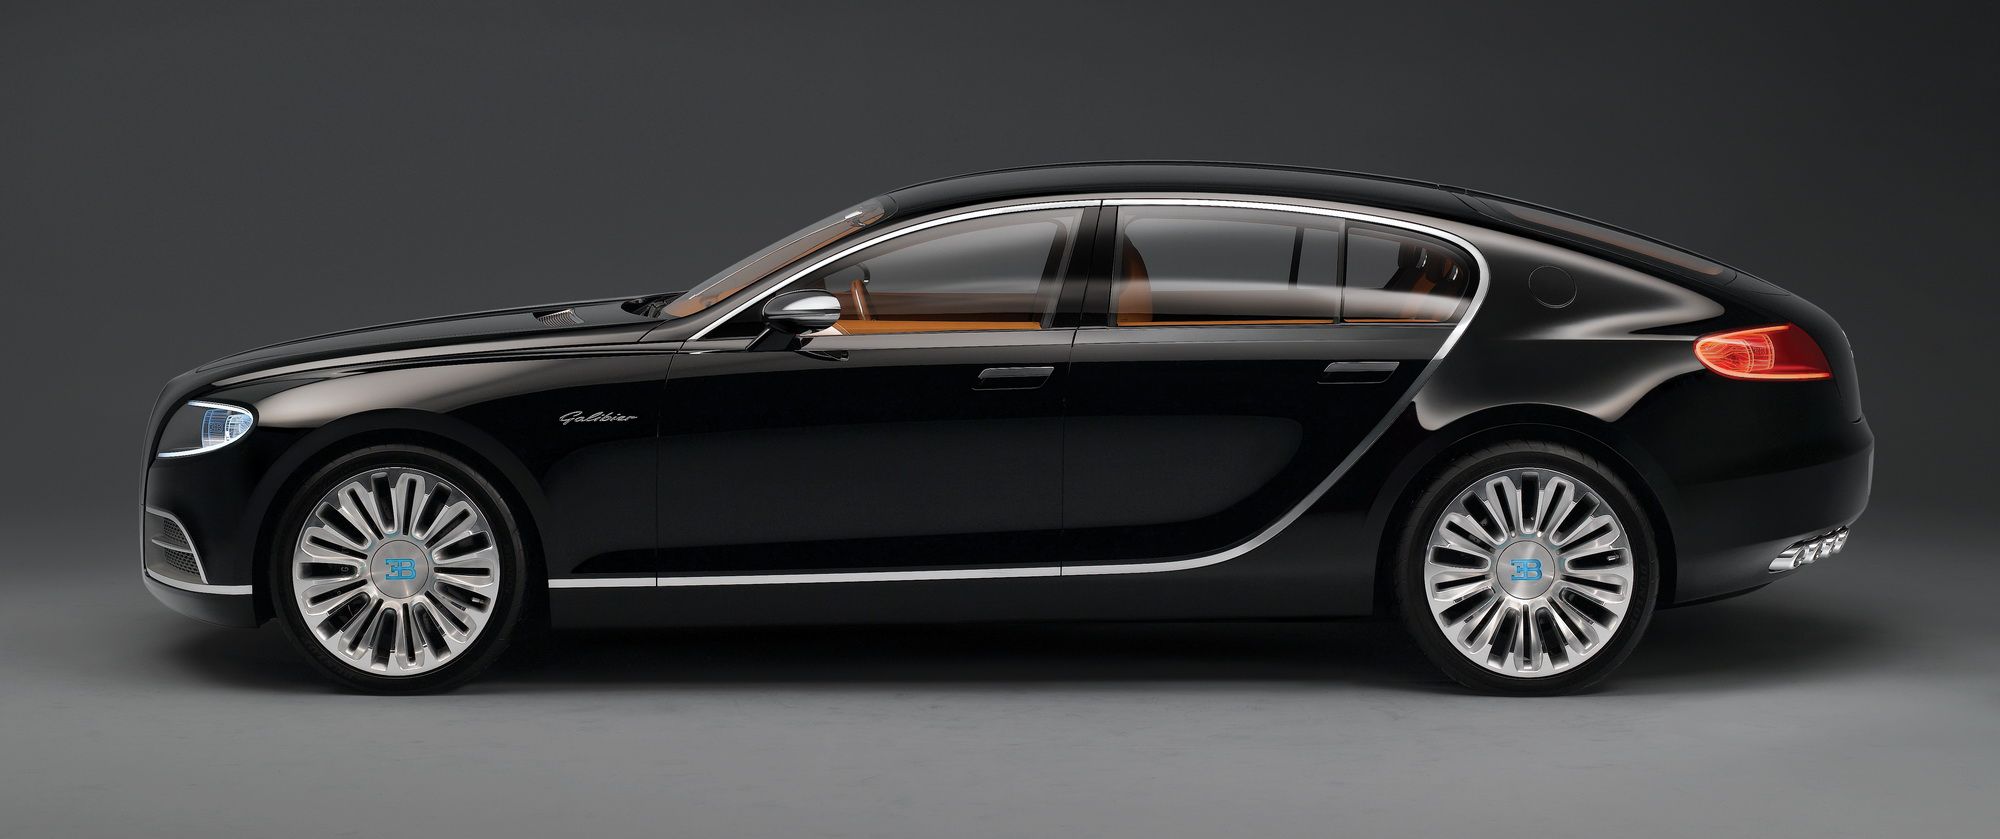 2020 Bugatti Could Bring Back the Galibier As an All-Electric Sedan if Volkswagen Approves